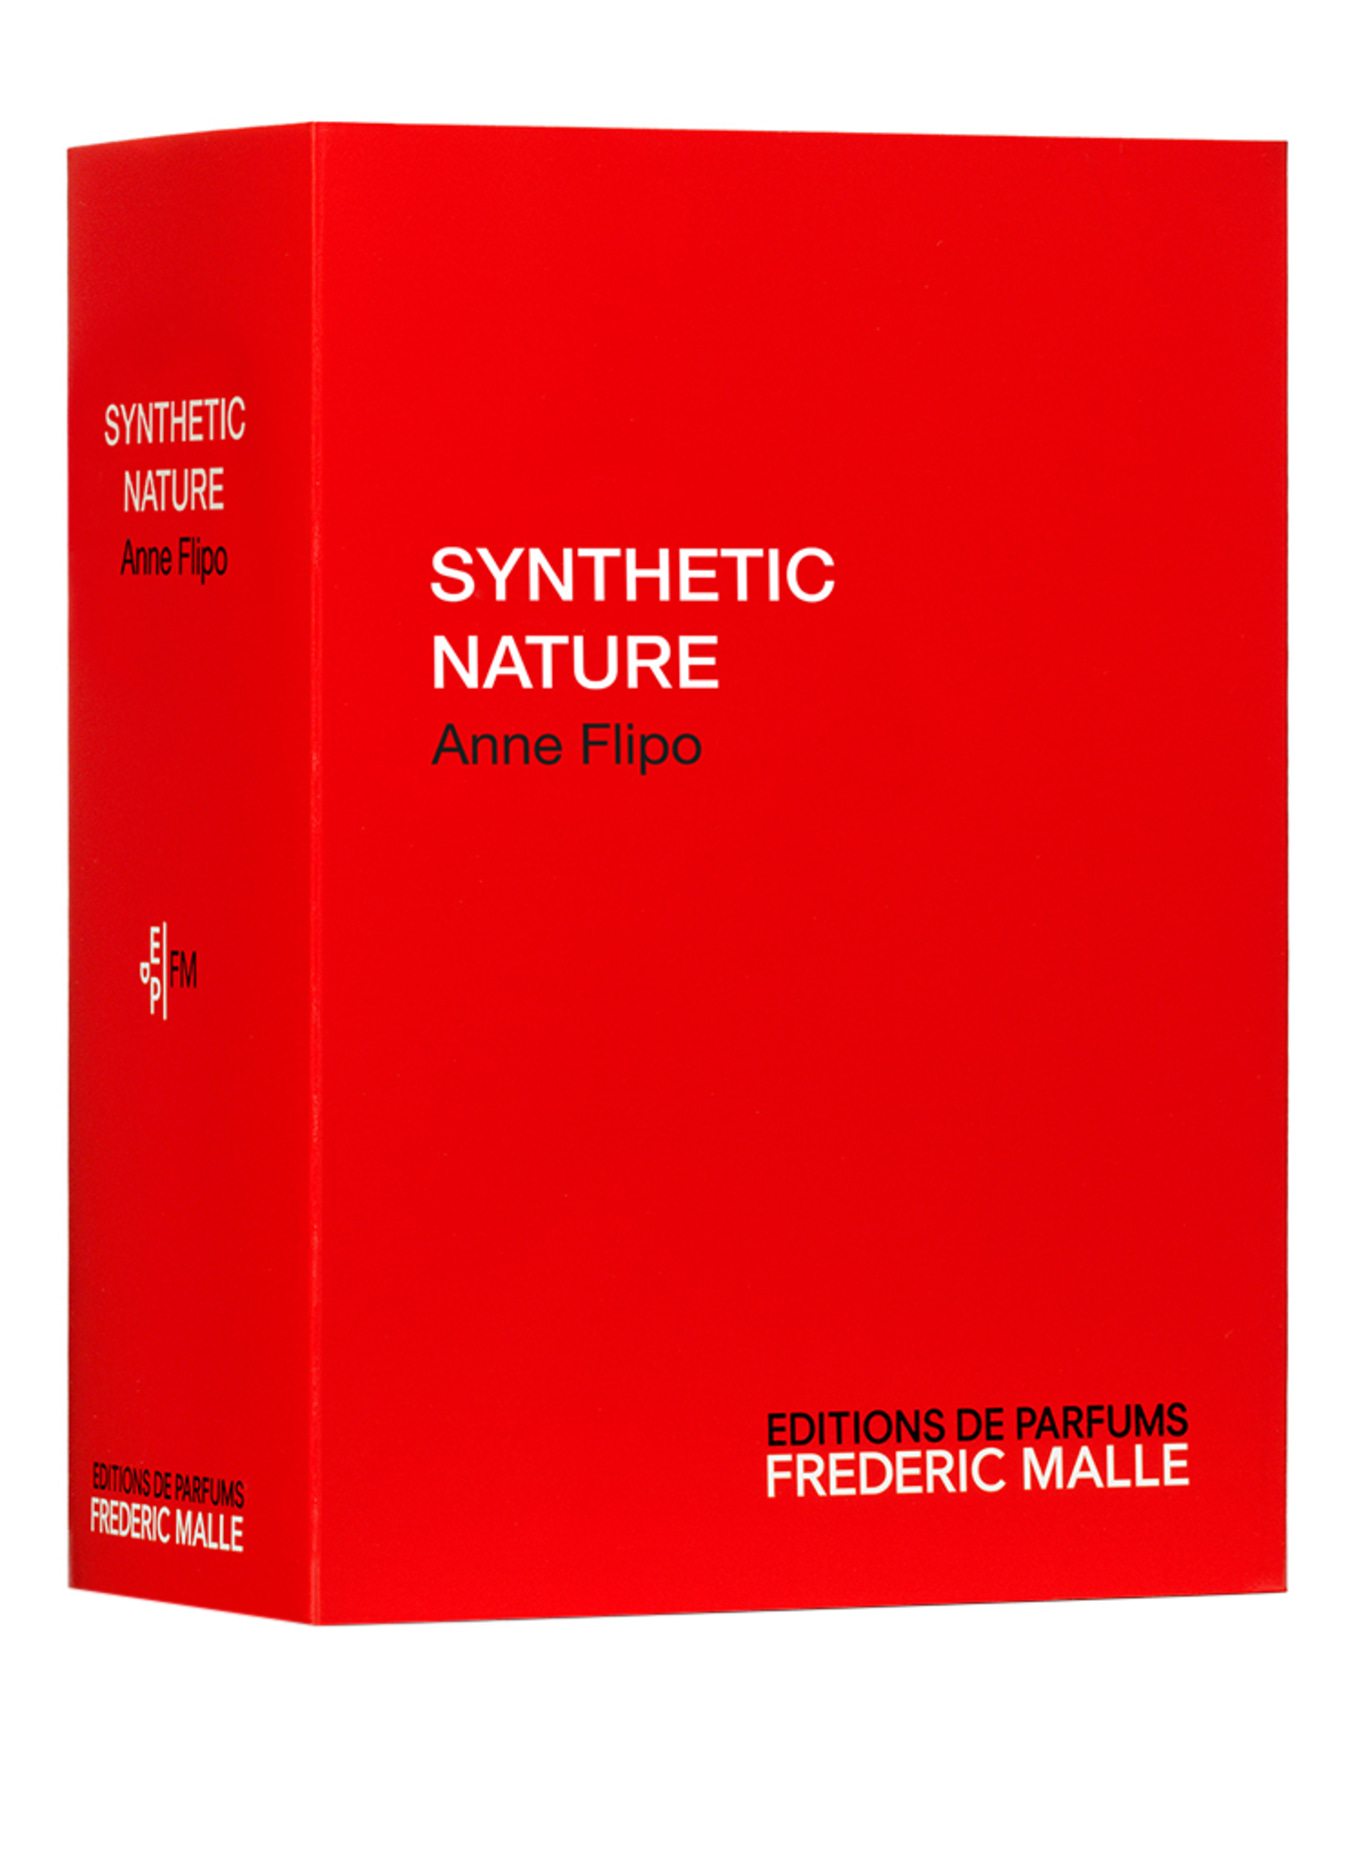 EDITIONS DE PARFUMS FREDERIC MALLE SYNTHETIC NATURE COLOGNE (Obrazek 2)